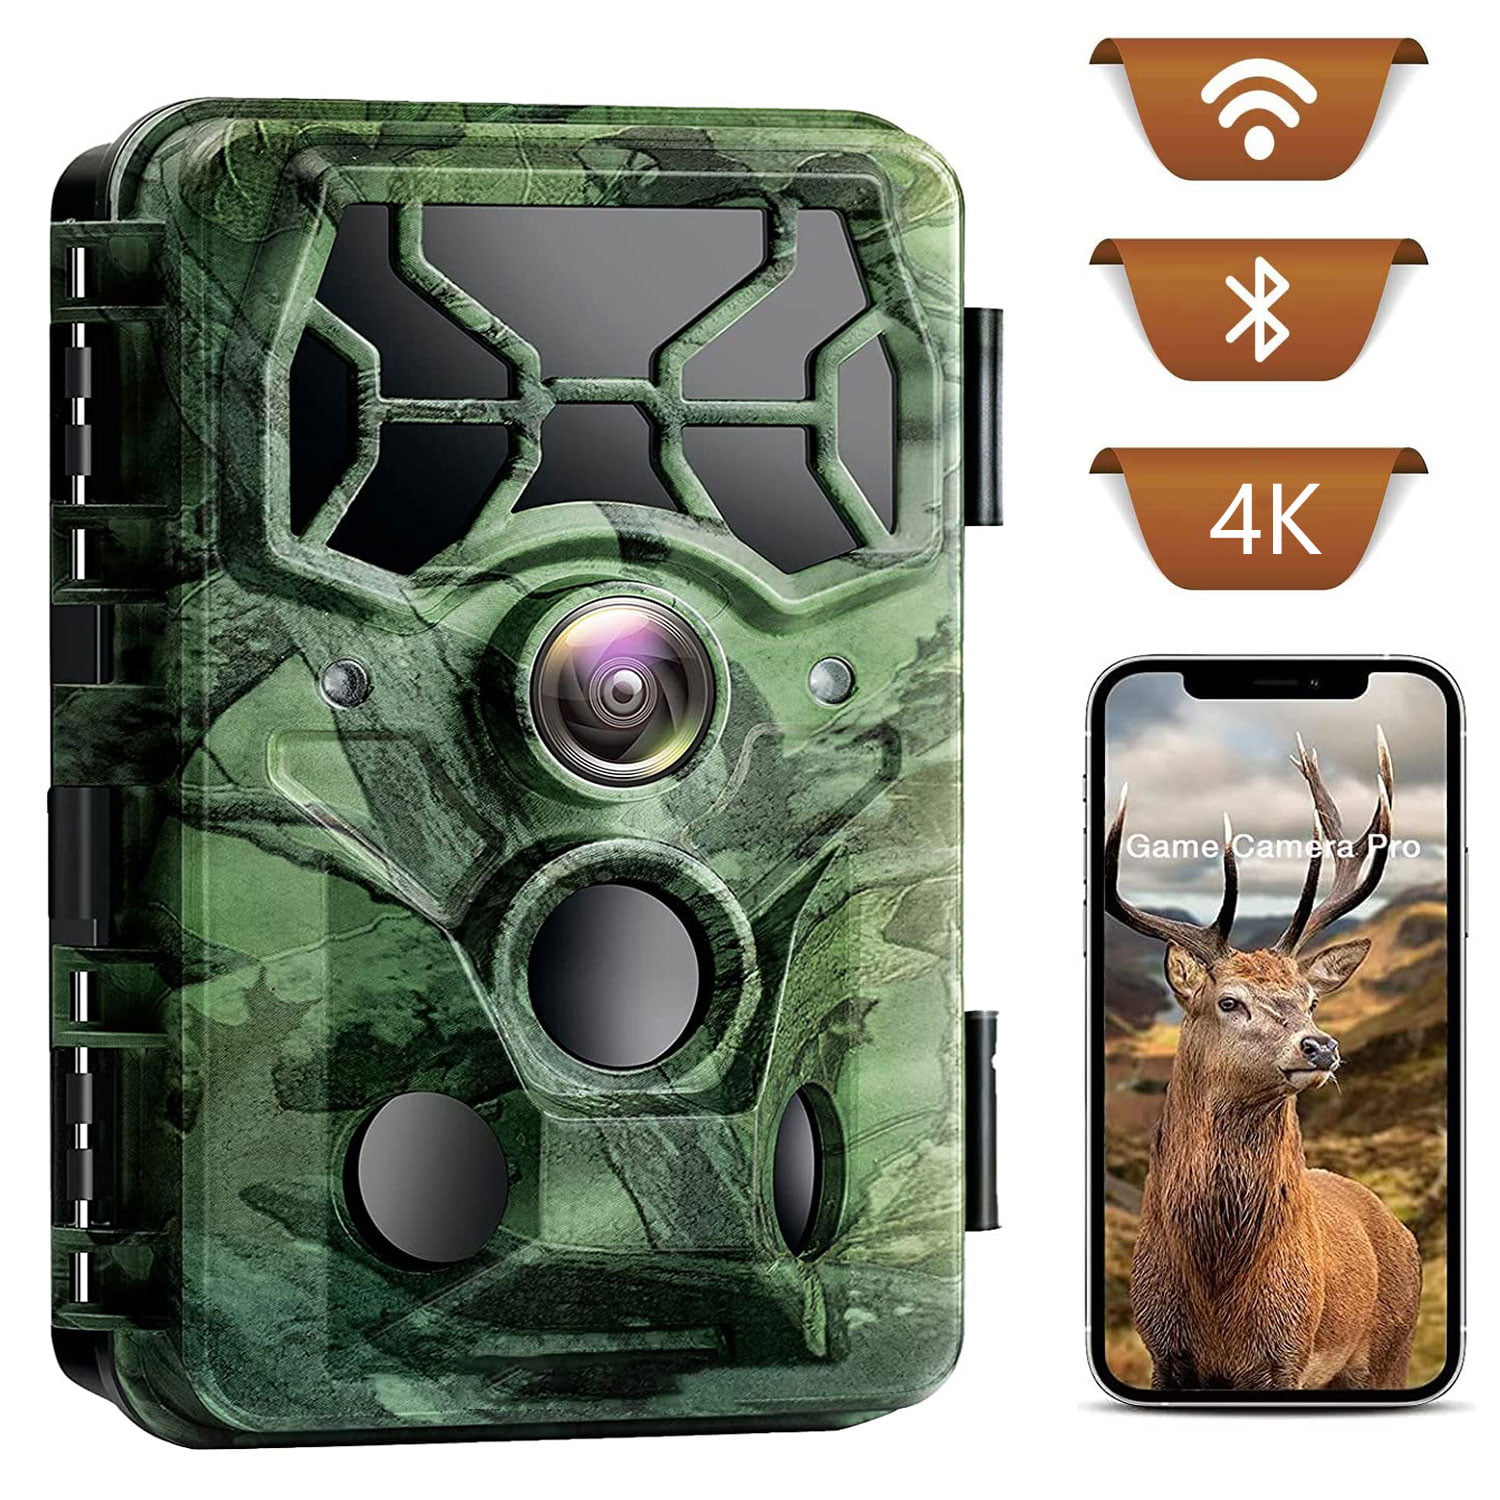 LIVE Video Trail Camera WiFi Bluetooth 24MP 1296P Outdoor Wildlife Hunting Cam 